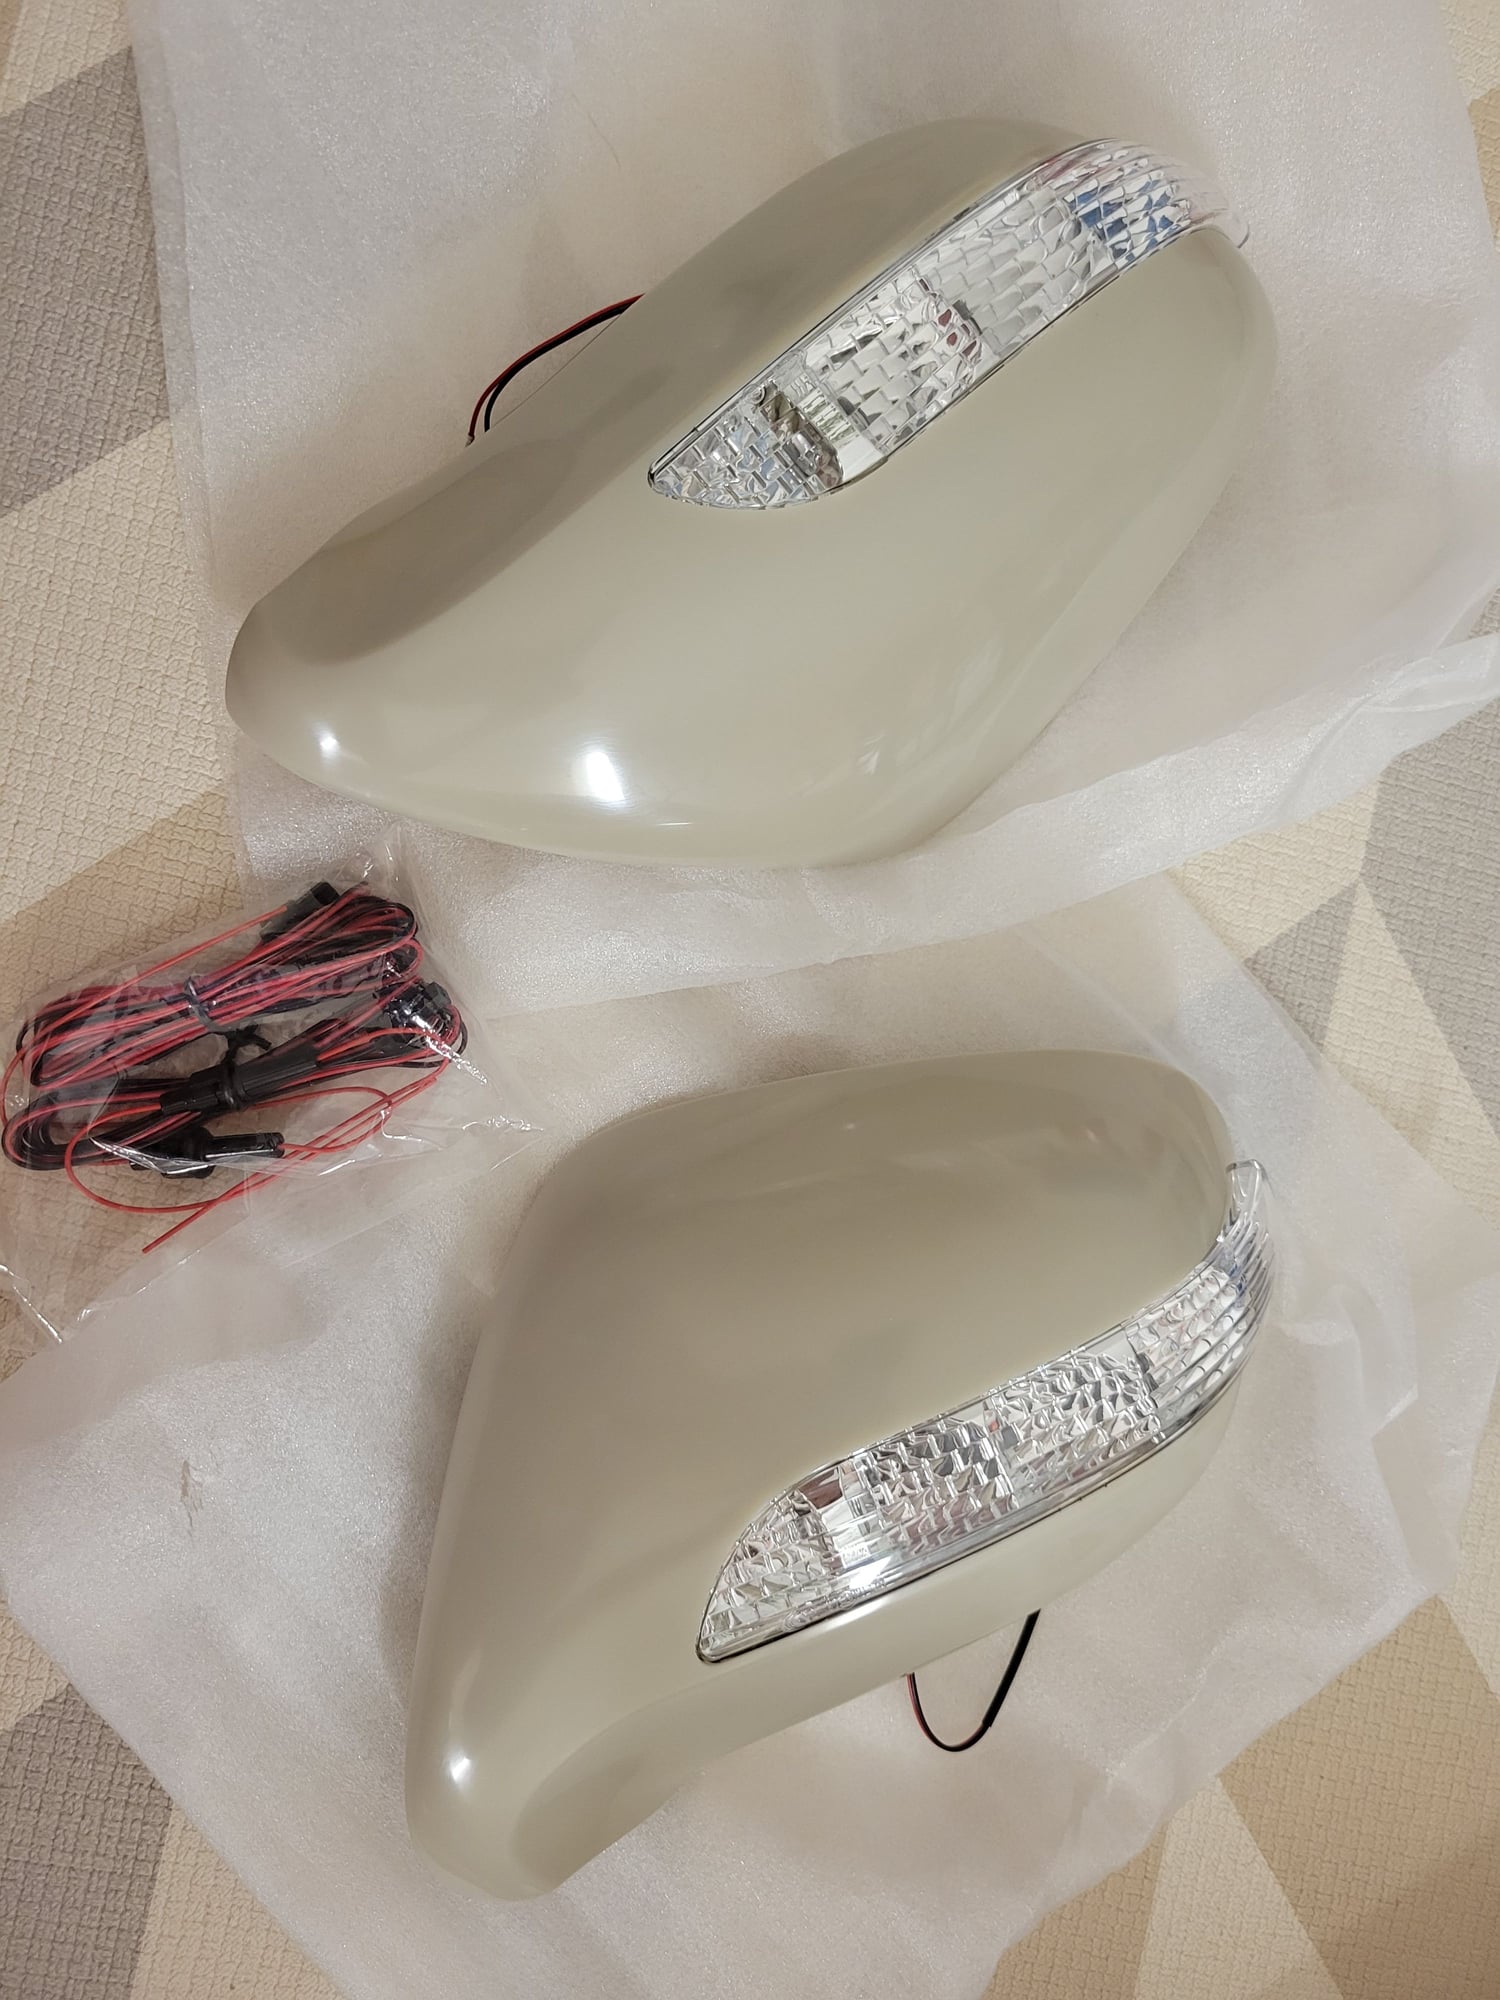 Lights - R/L mirror cover w/LED - New - 2006 to 2008 Lexus IS250 - 2006 to 2008 Lexus IS350 - Los Angeles, CA 90005, United States